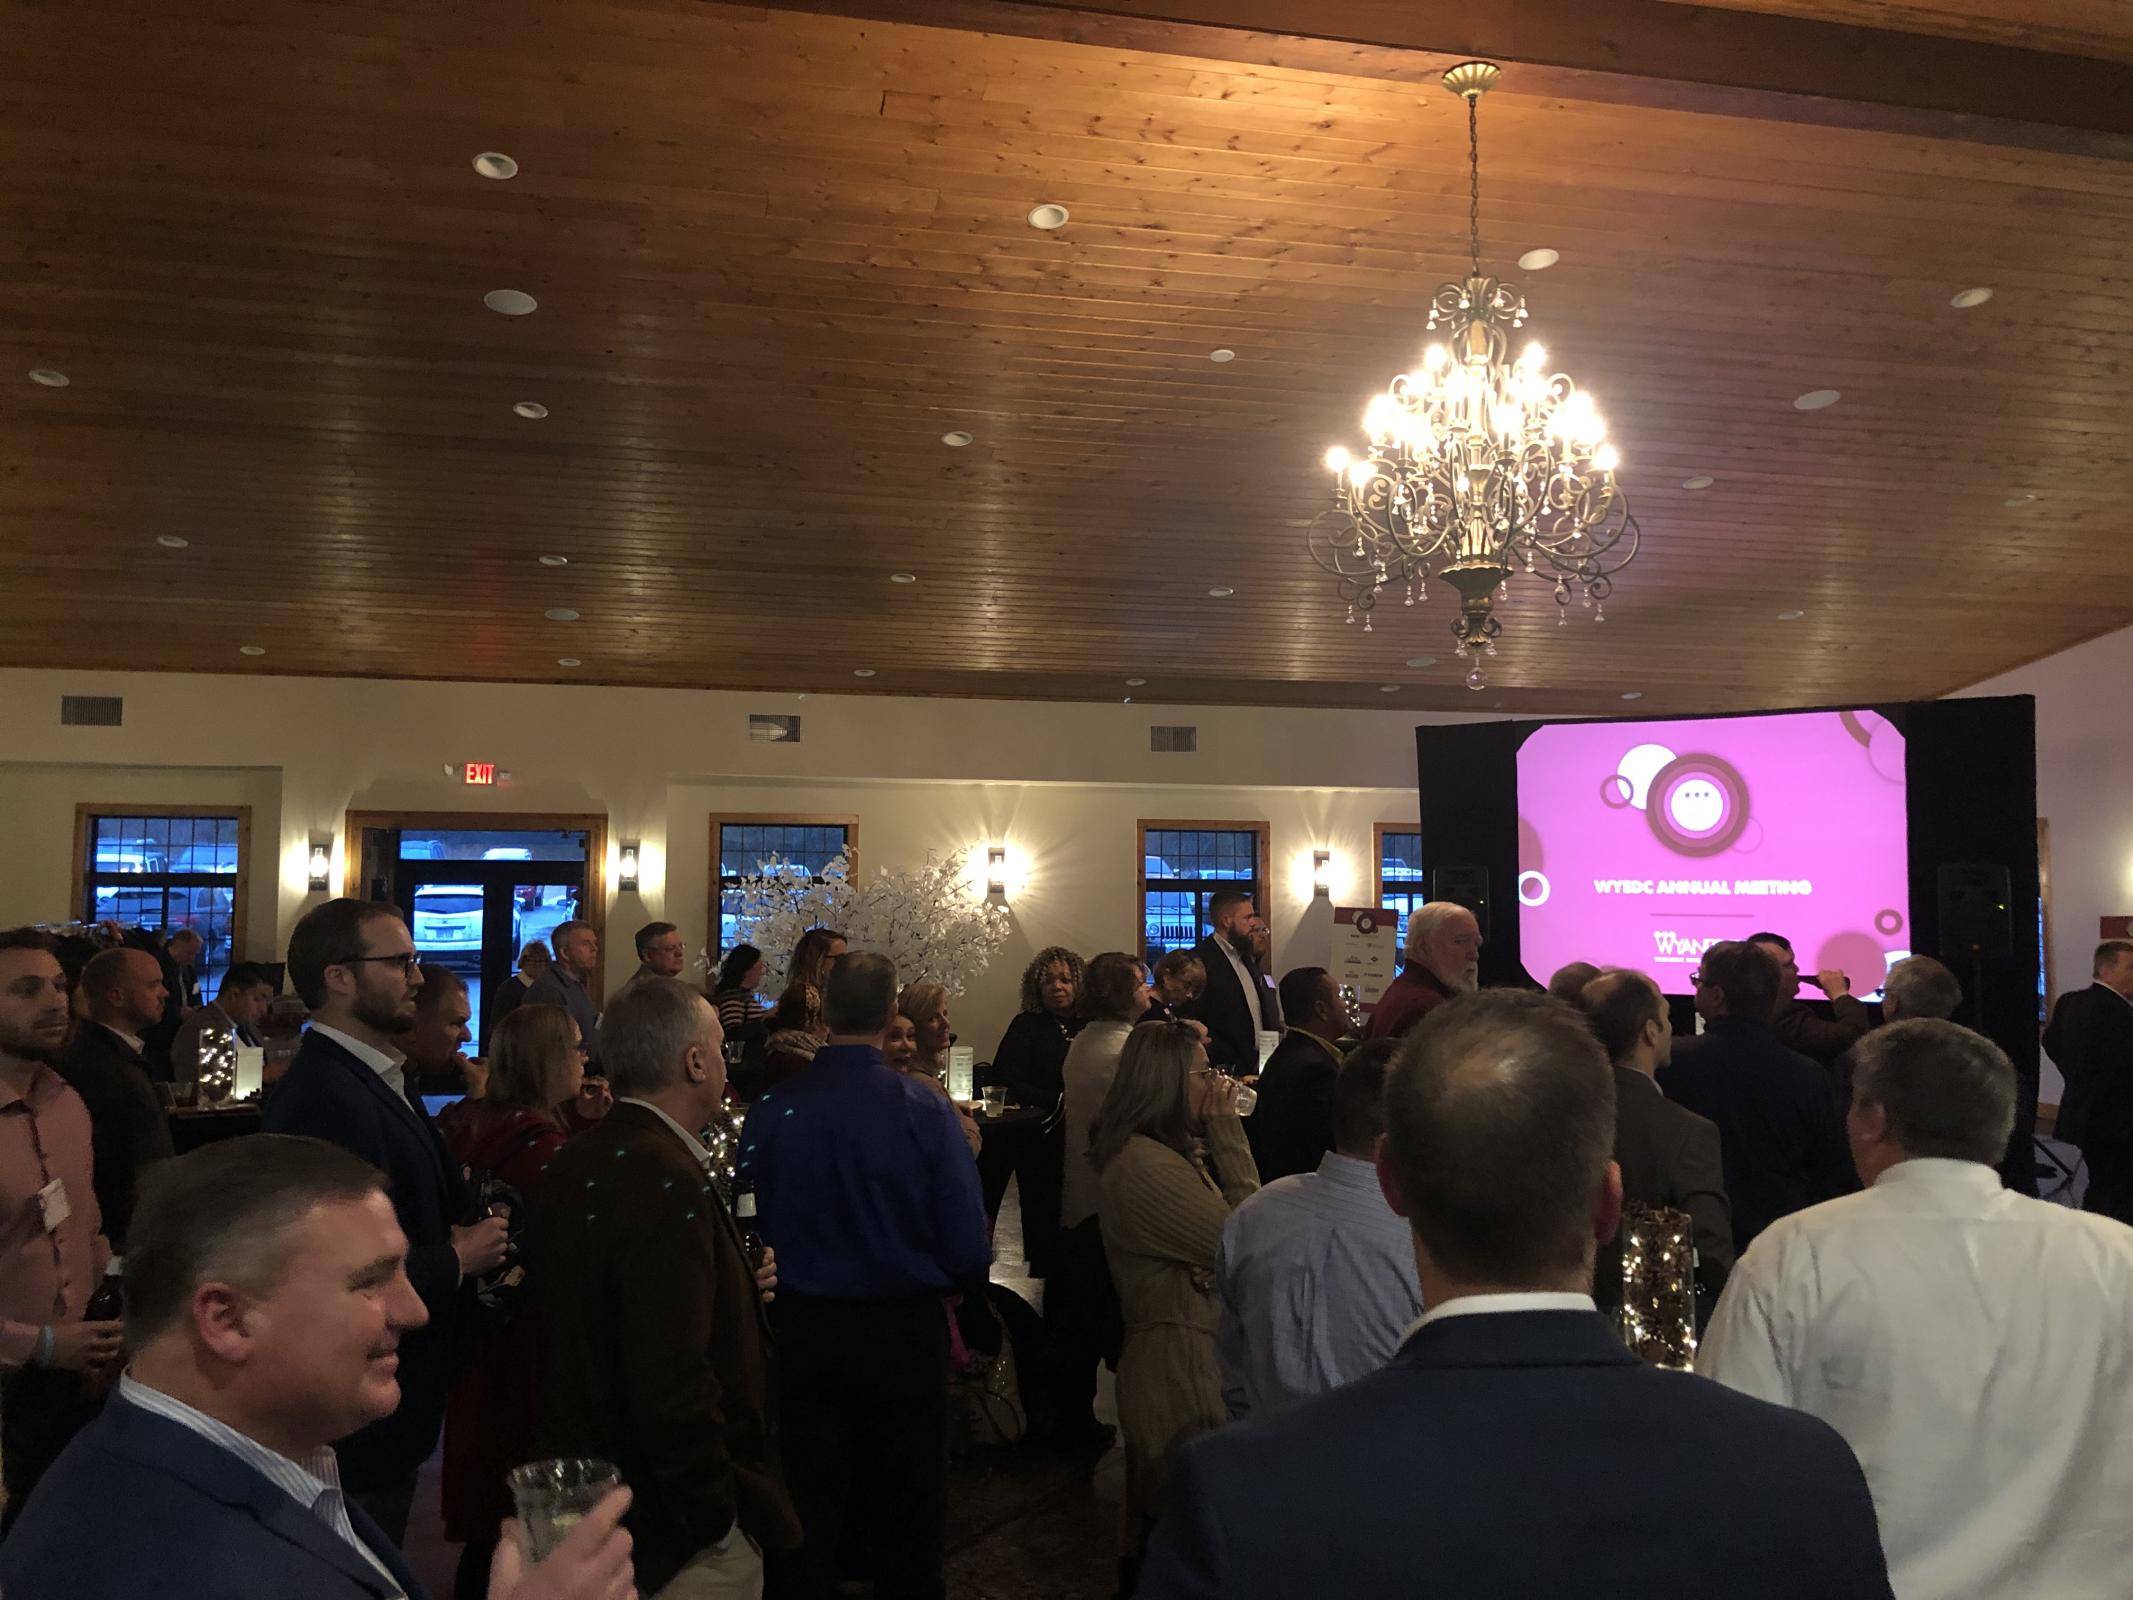 2019 Annual Meeting at The Venue at Willow Creek in KCK